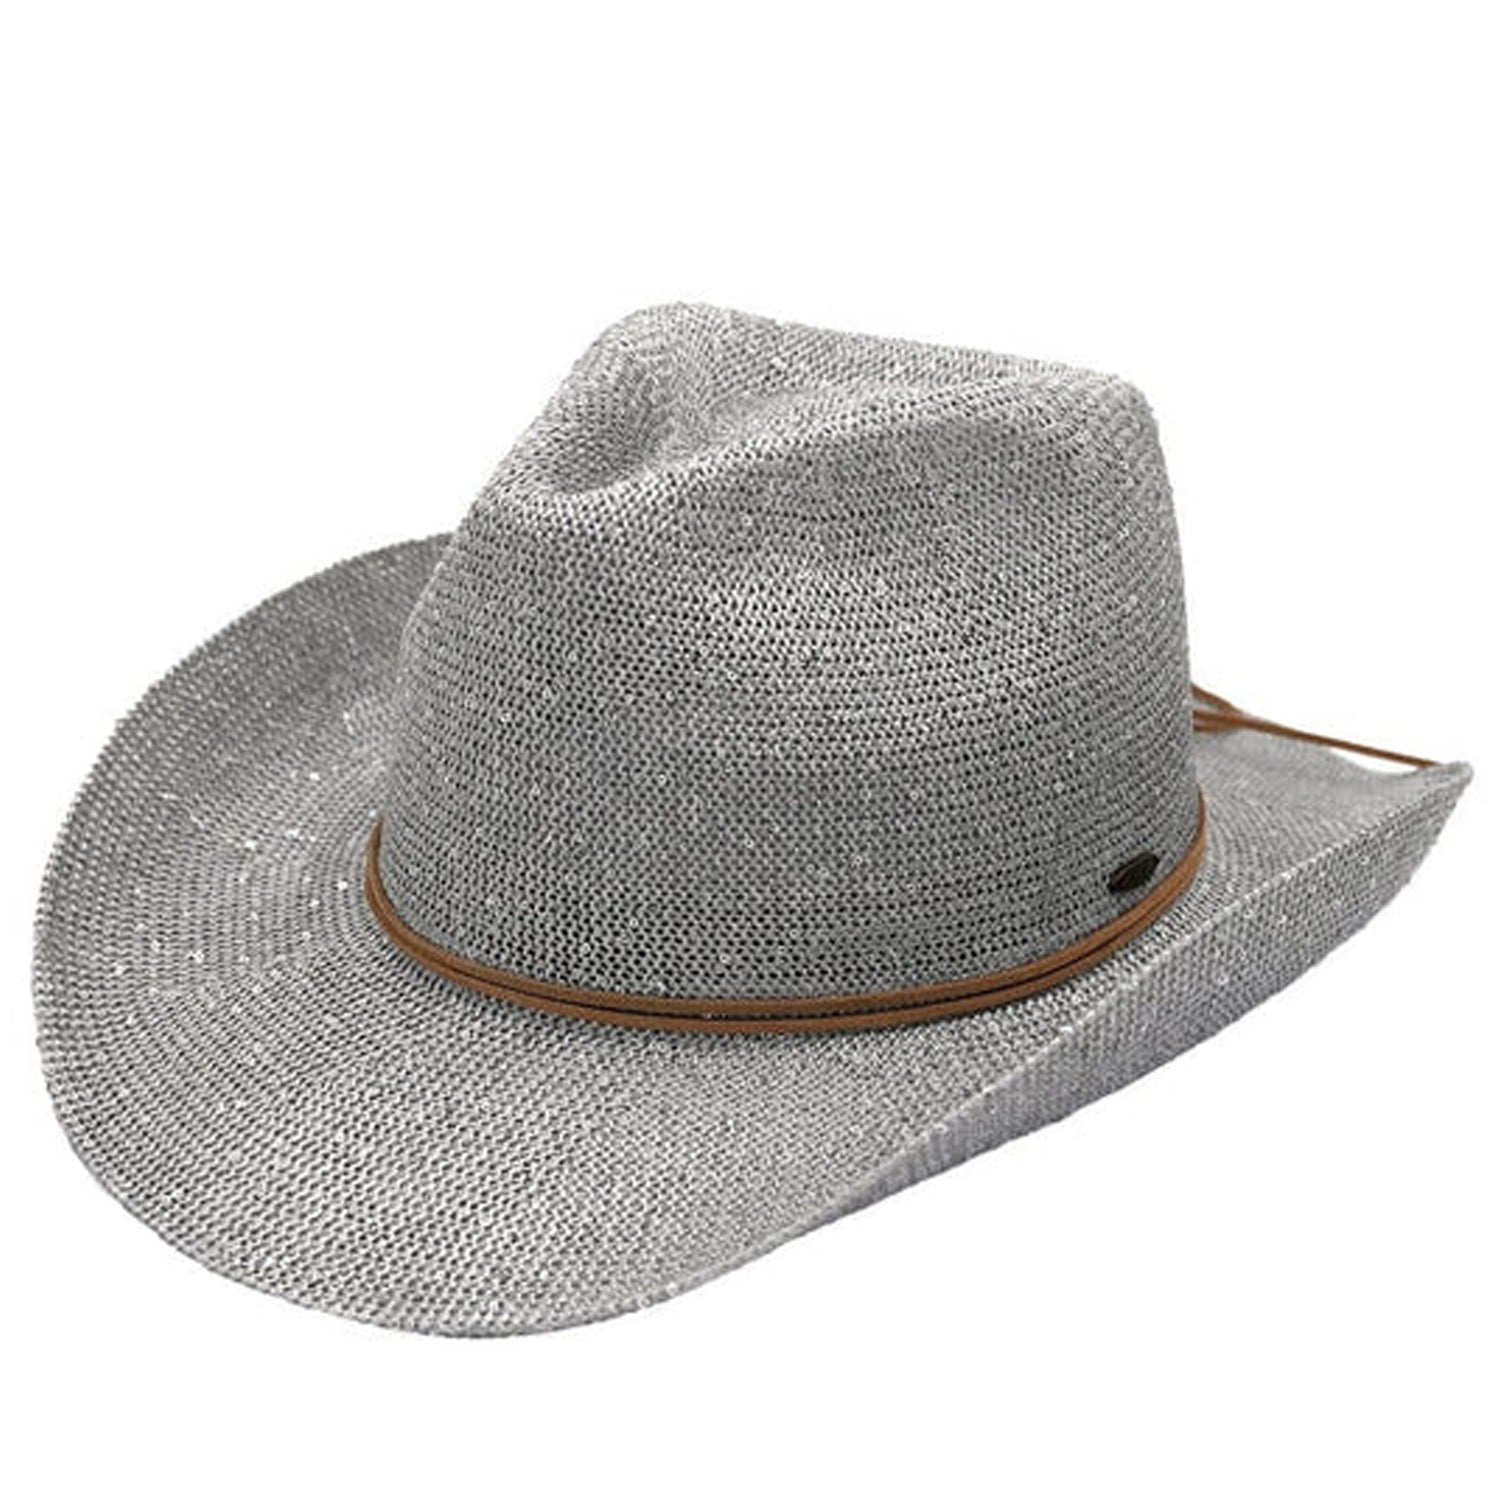 CBC-03 Cowgirl Hat with Glitter Silver